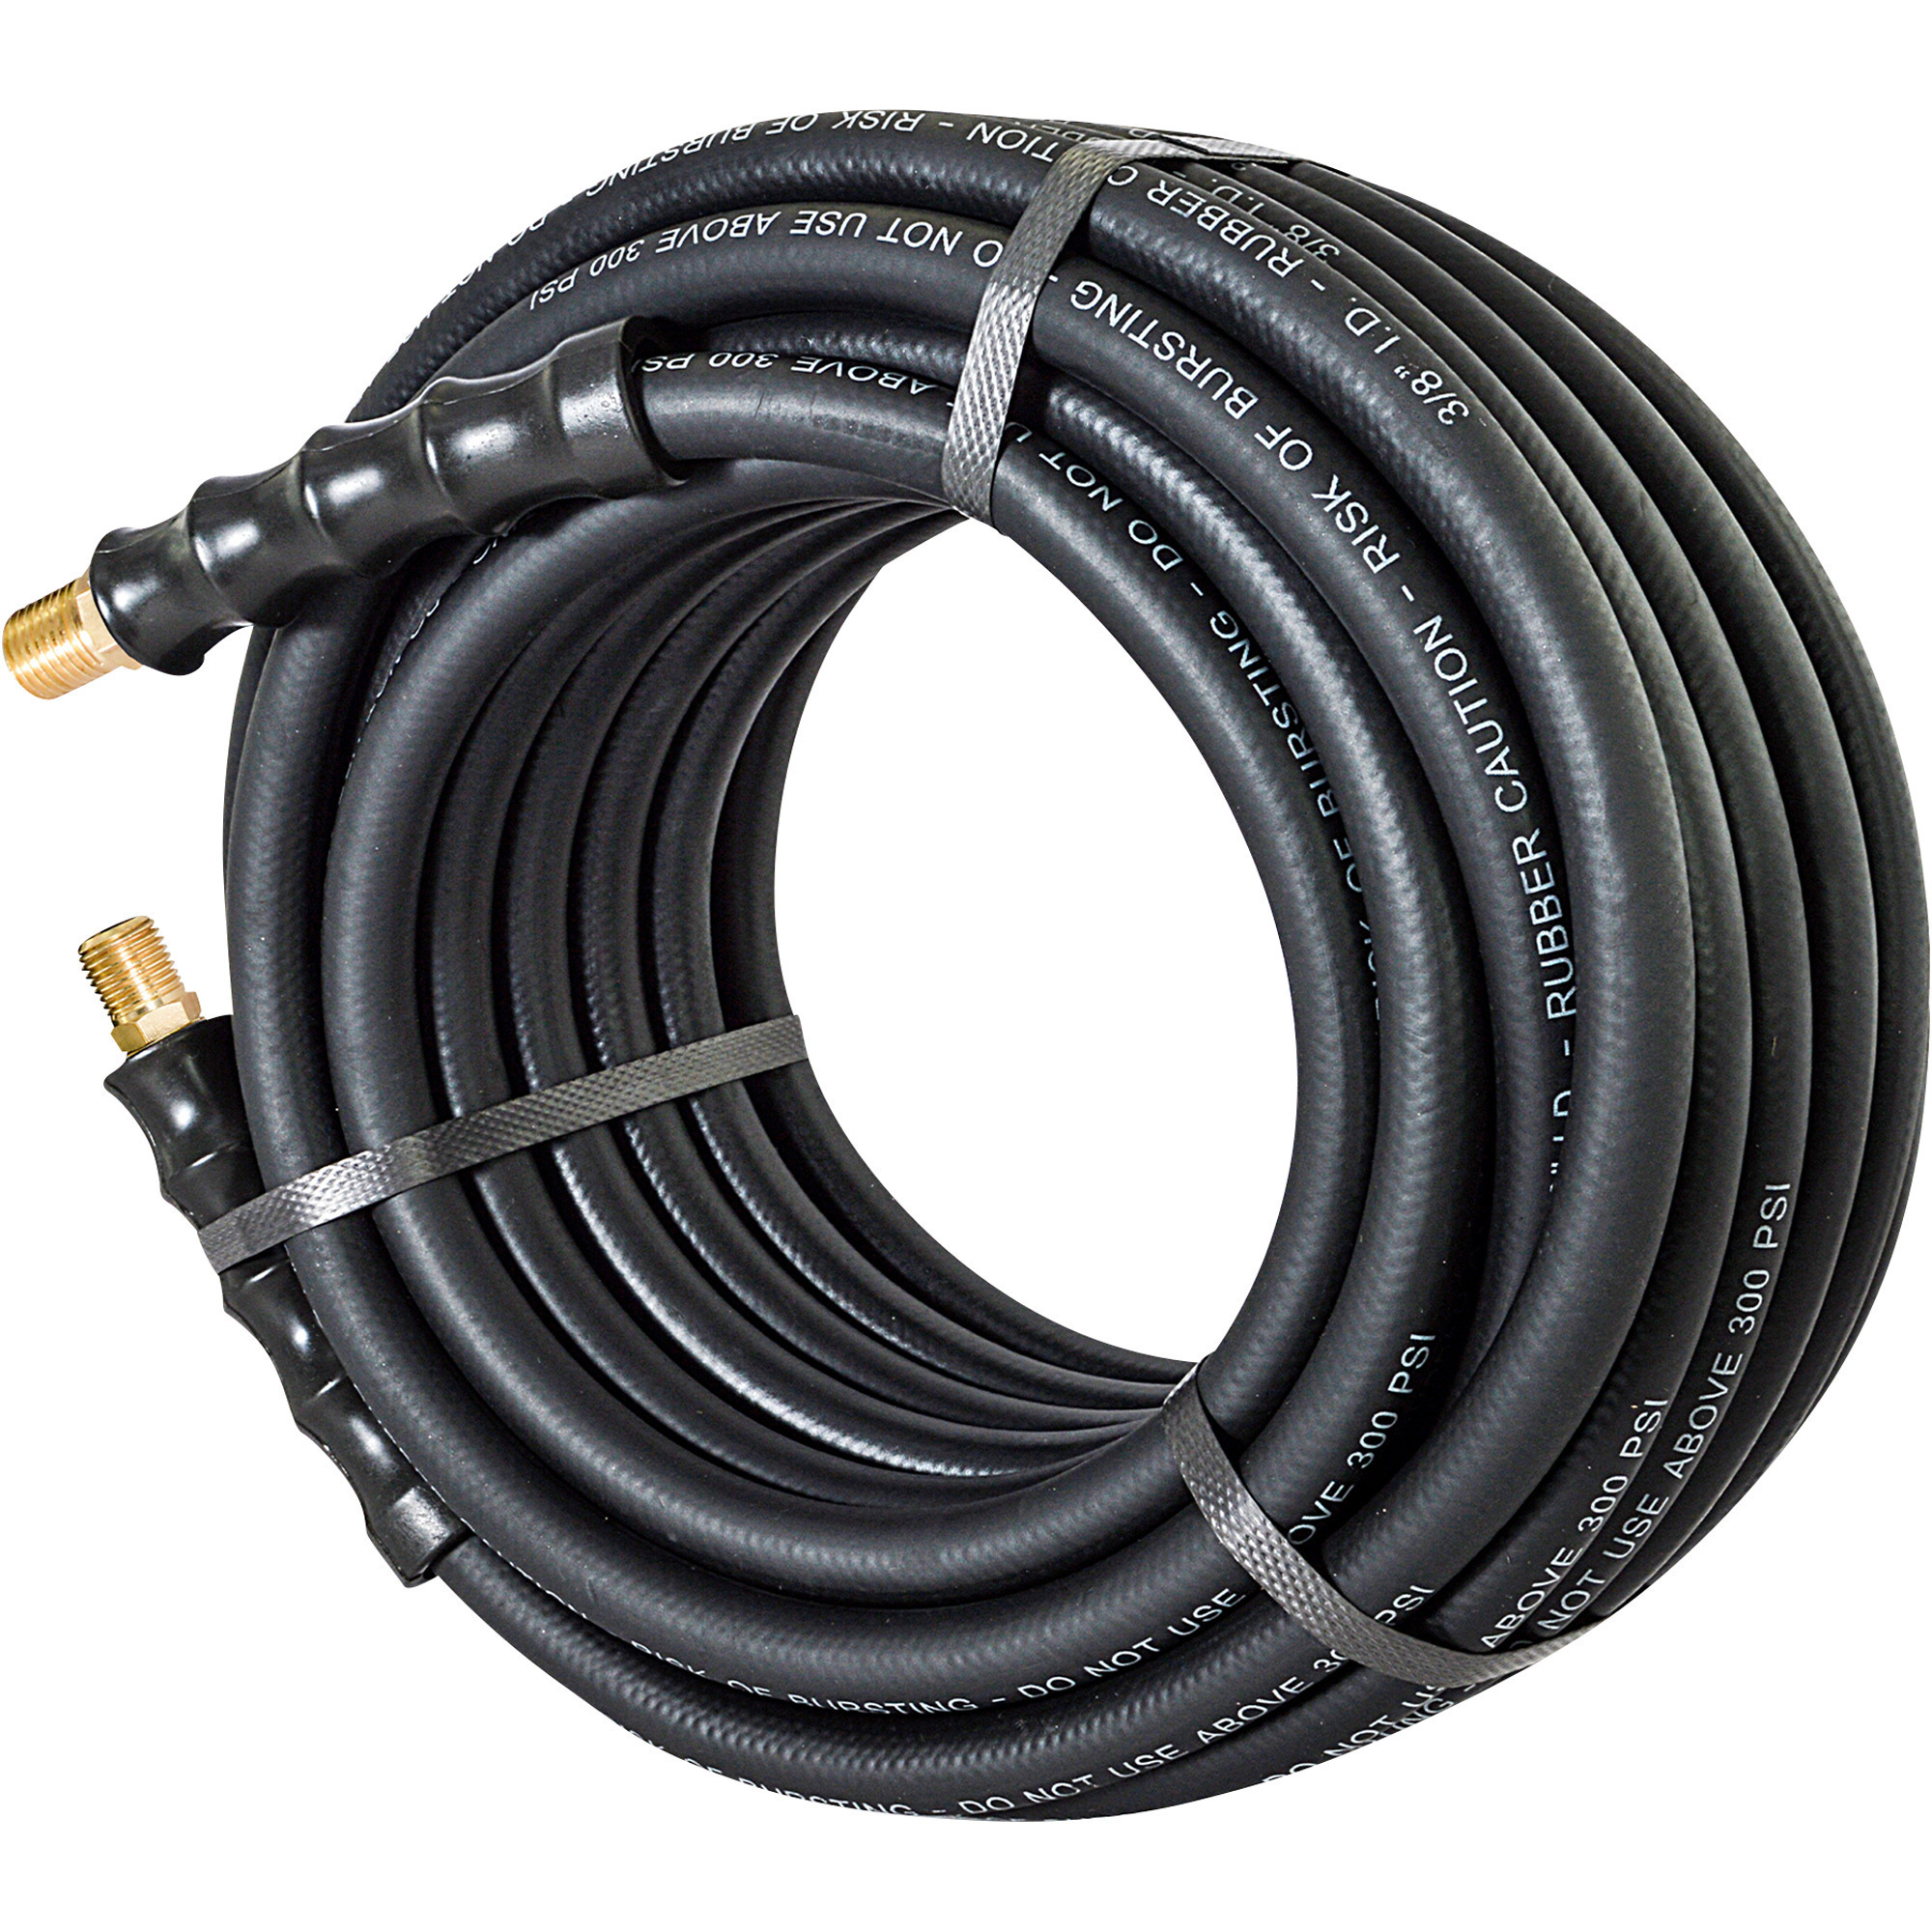 Hose, 3/8in. 300 Klutch 50ft., | Rubber TLEX3850-NT PSI, Air Tool Northern x Model#